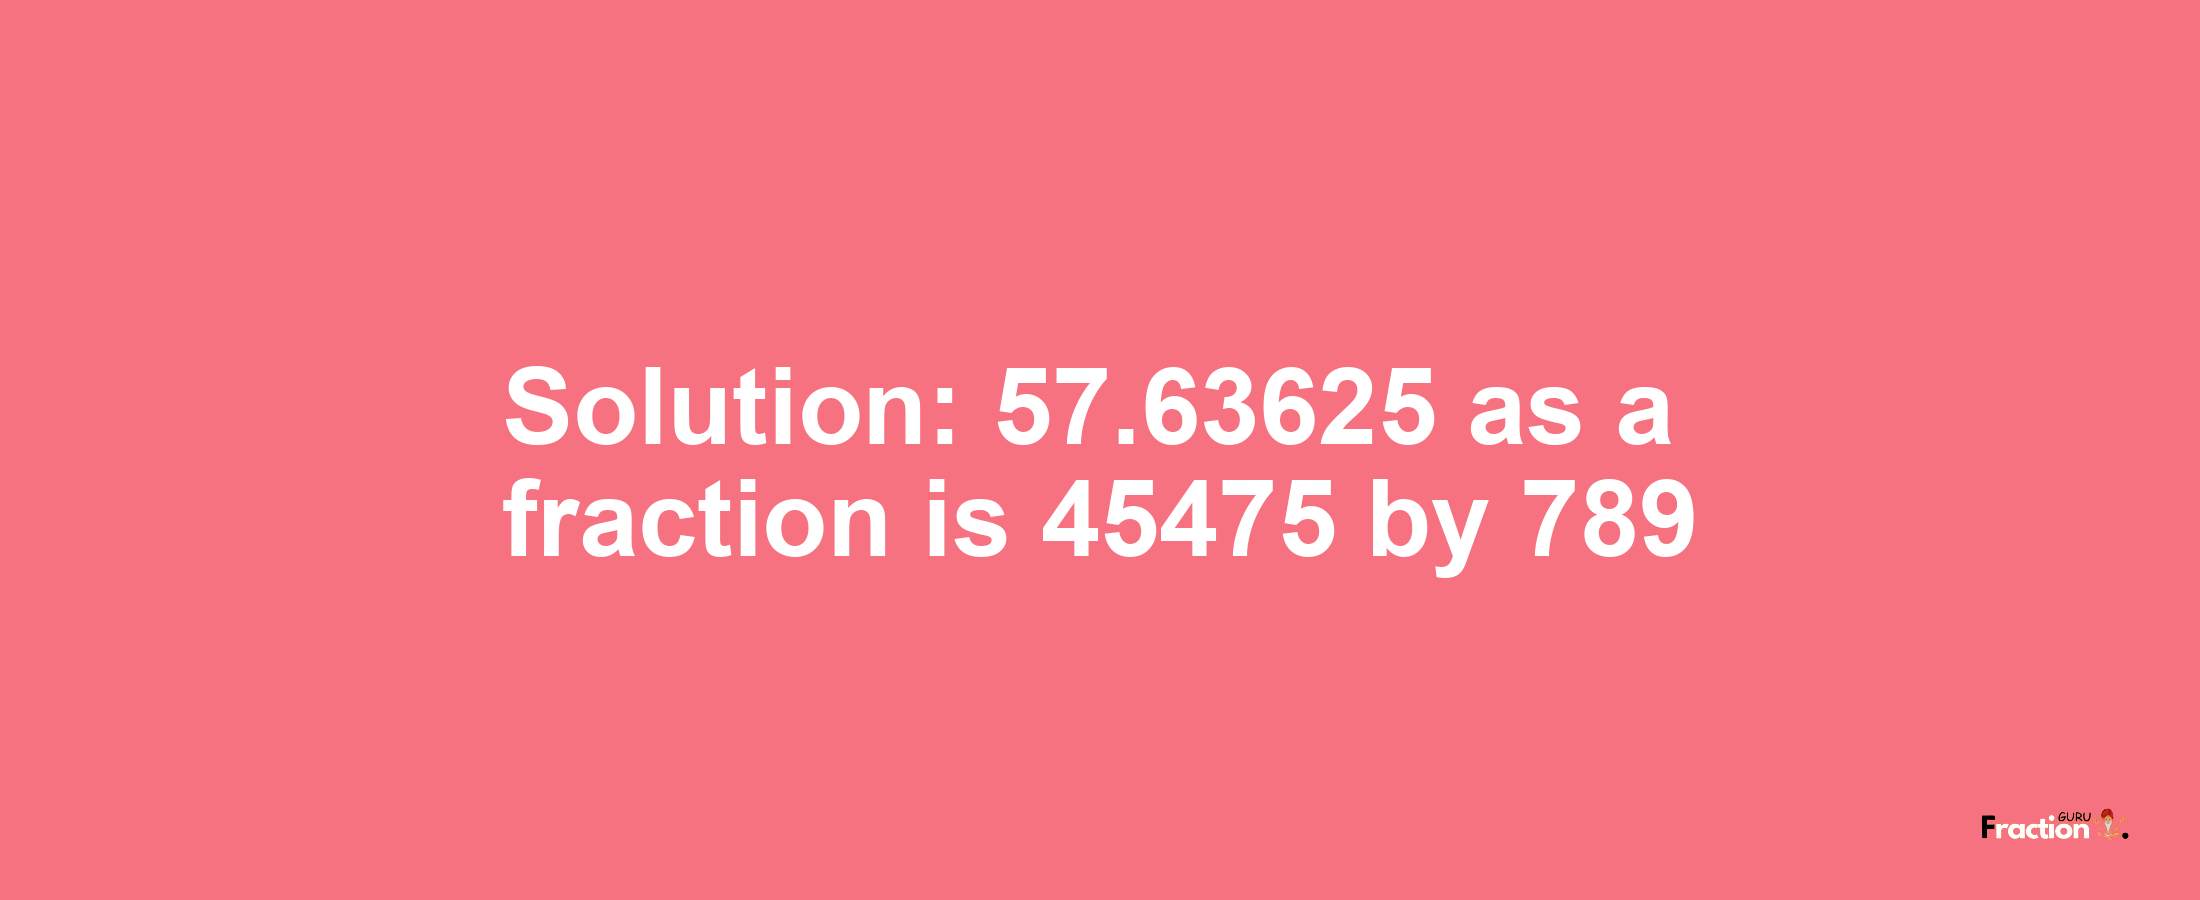 Solution:57.63625 as a fraction is 45475/789